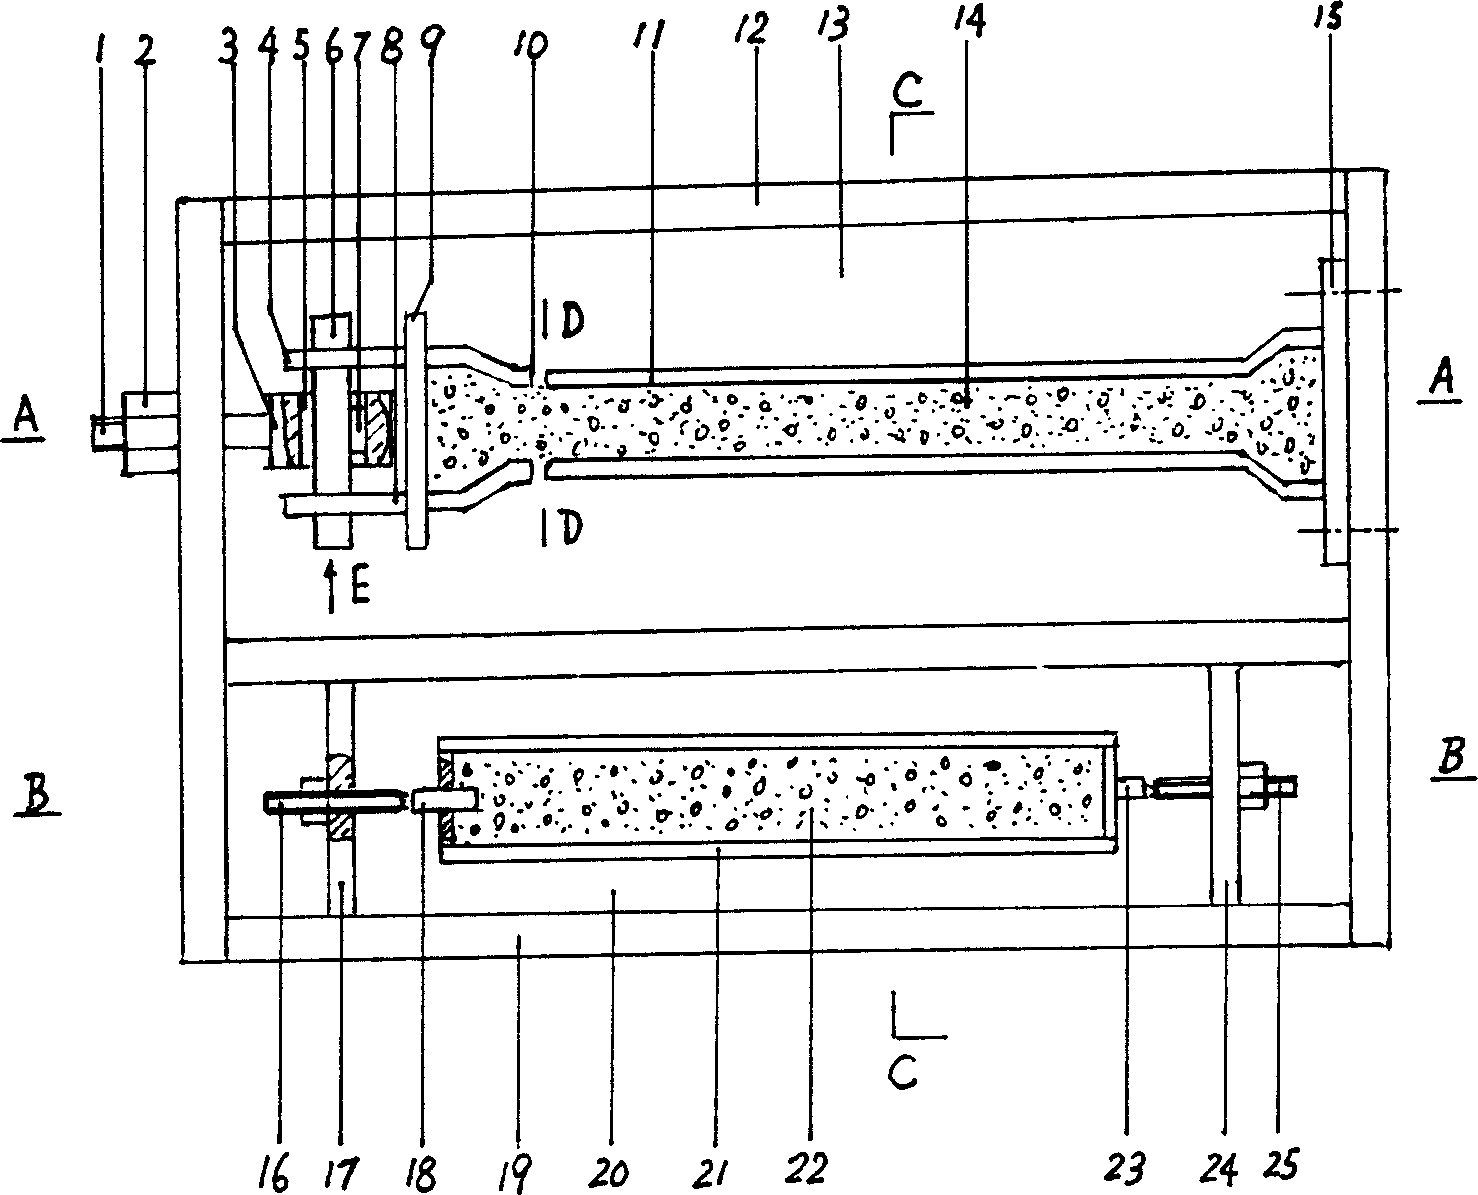 Measuring device for concrete shrinkage and stress